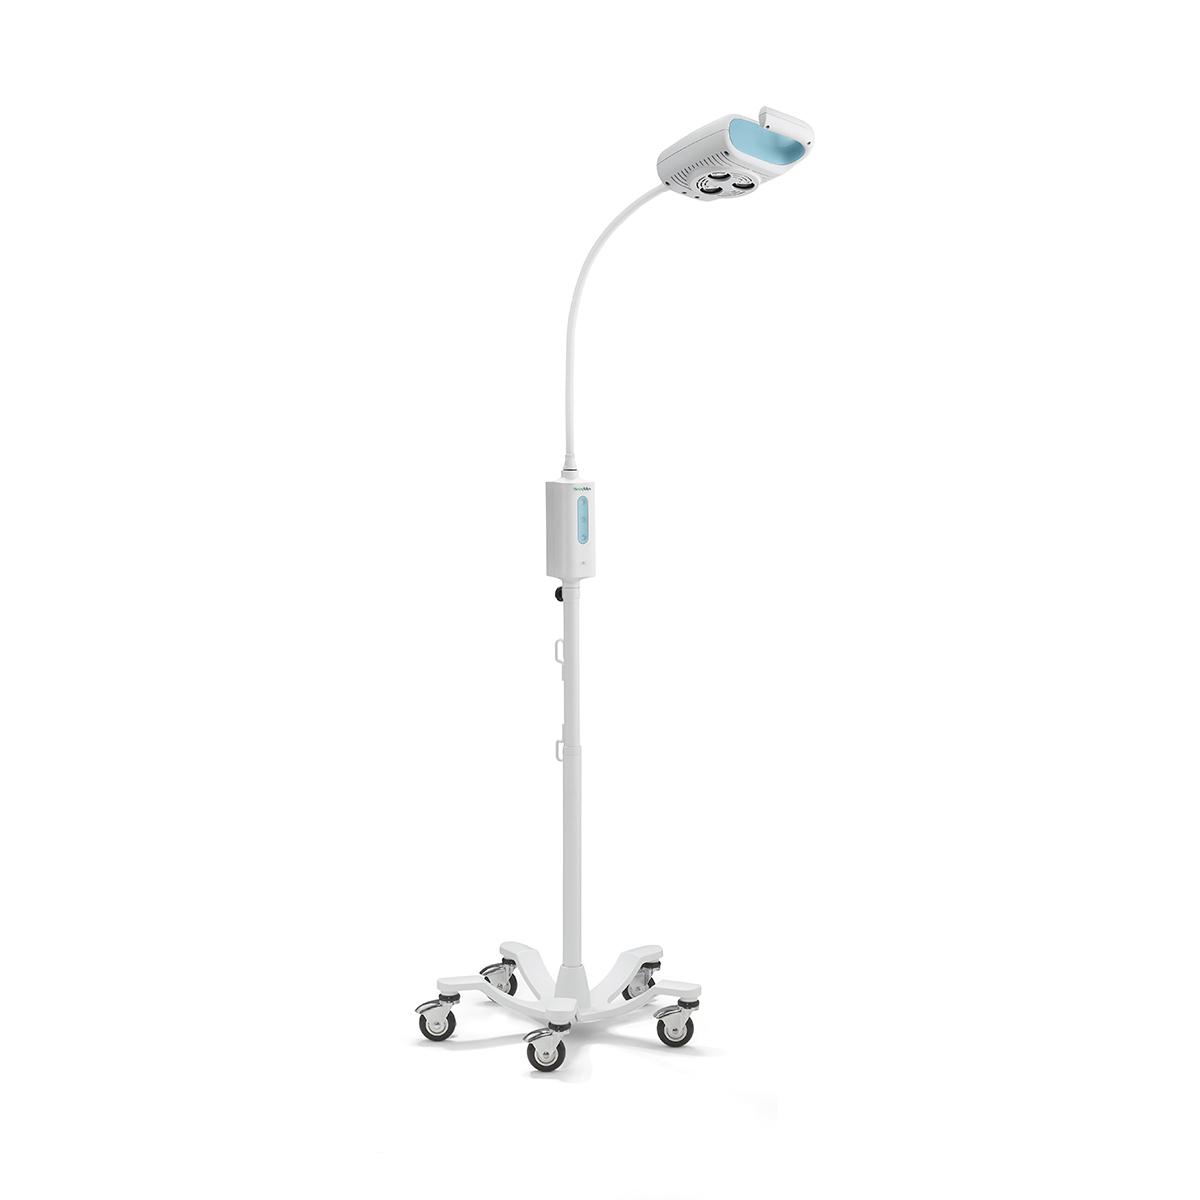 Green Series 600 Minor Procedure Light full view on tall rolling stand